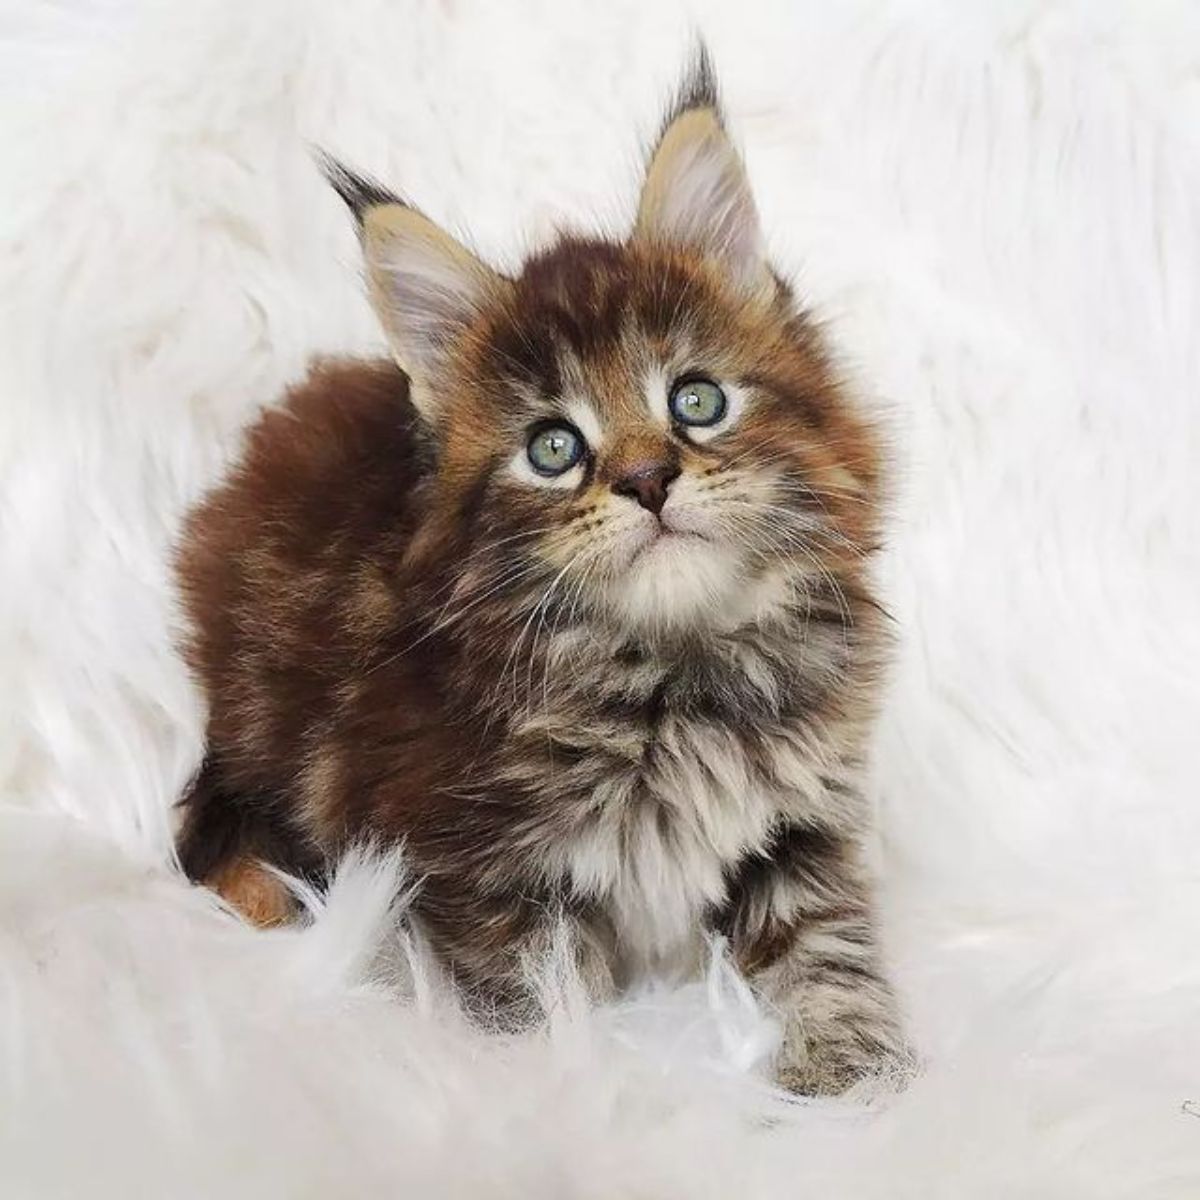 An adorable fluffy maine coon kitten standing on a fluffy white blanket.